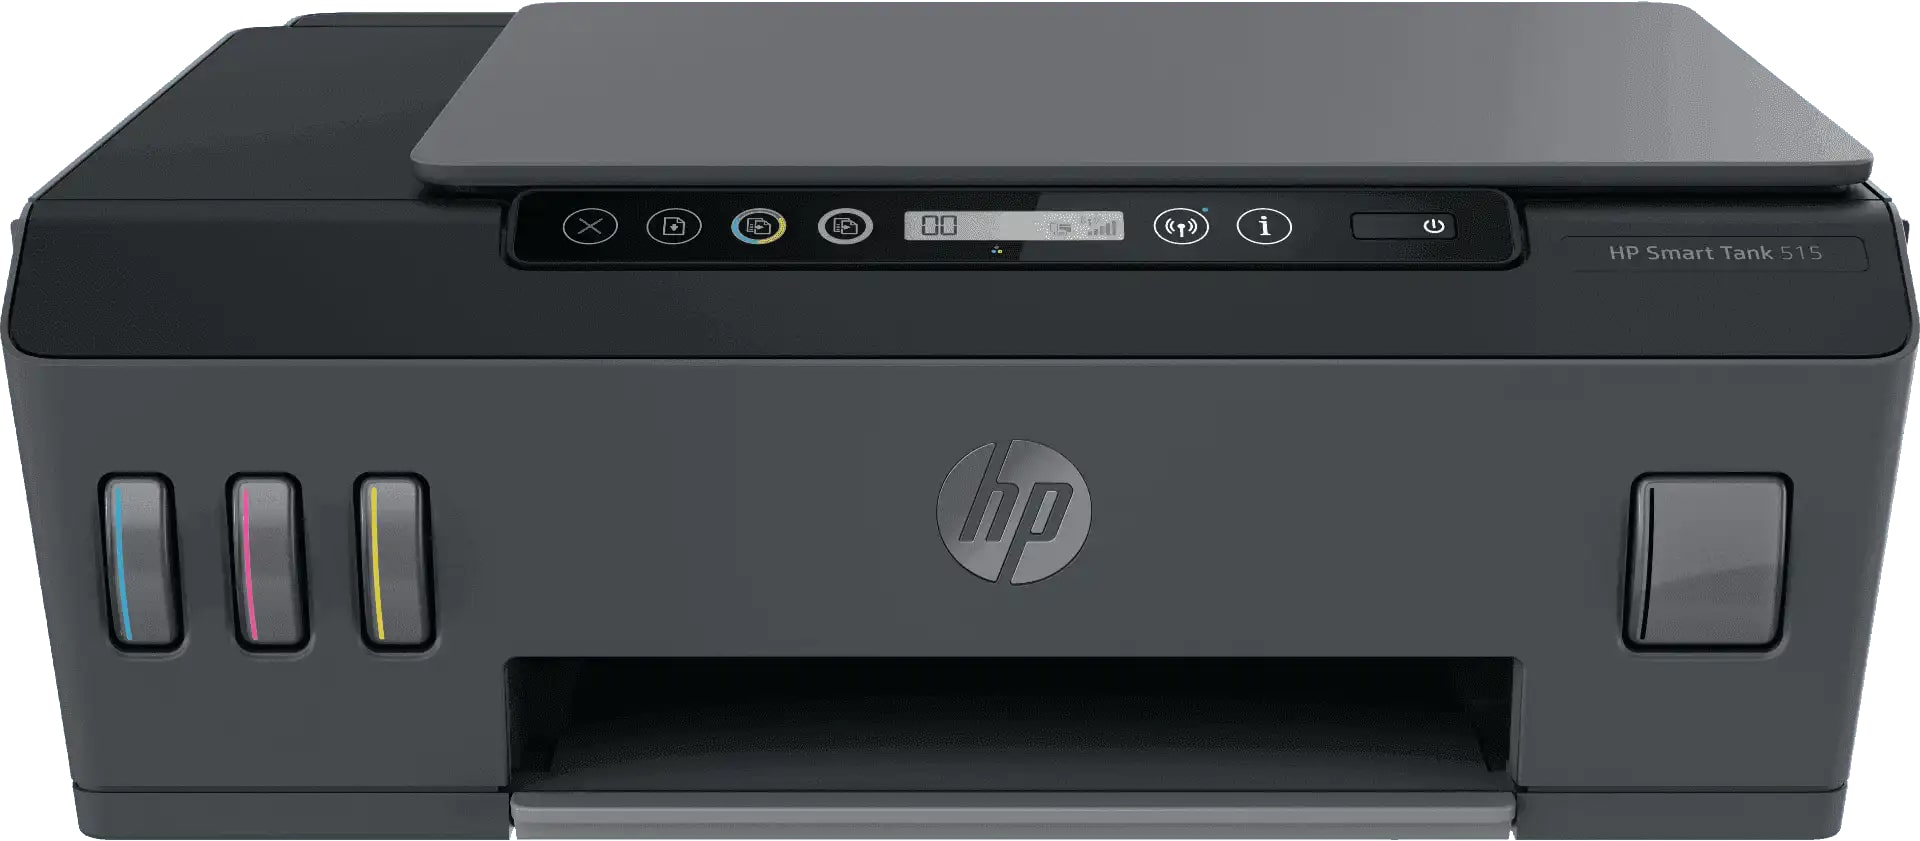 HP Smart Tank 515 Wireless All-in-One, Print, Copy and Scan, Print speed up to 11 ppm (black) and 5 ppm (color), USB, Wi-Fi, Bluetooth LE